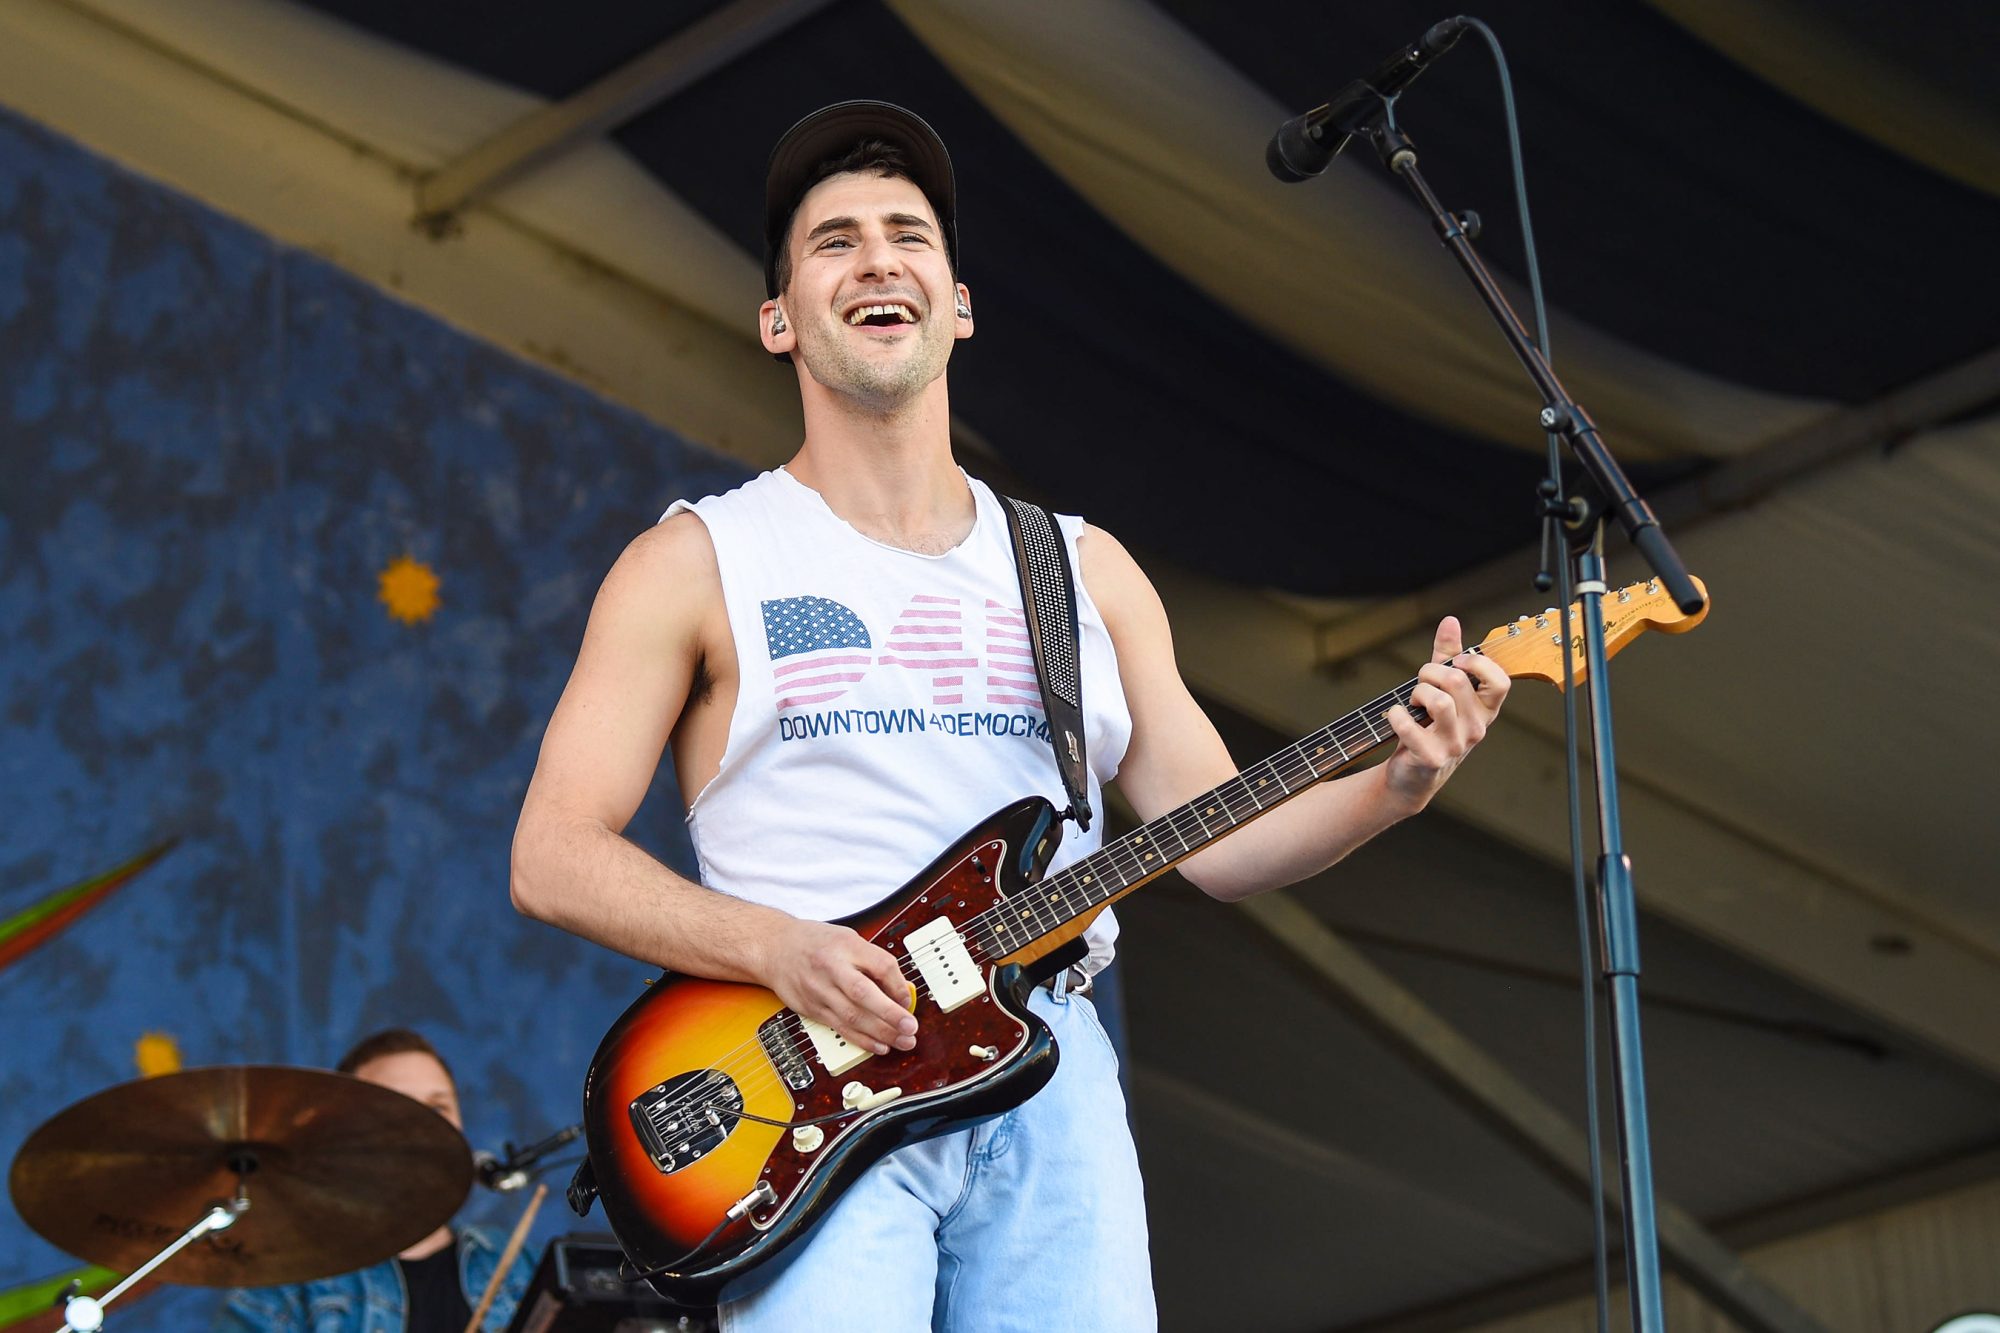 Jack Antonoff wearing a white tank top while playing electric guitar